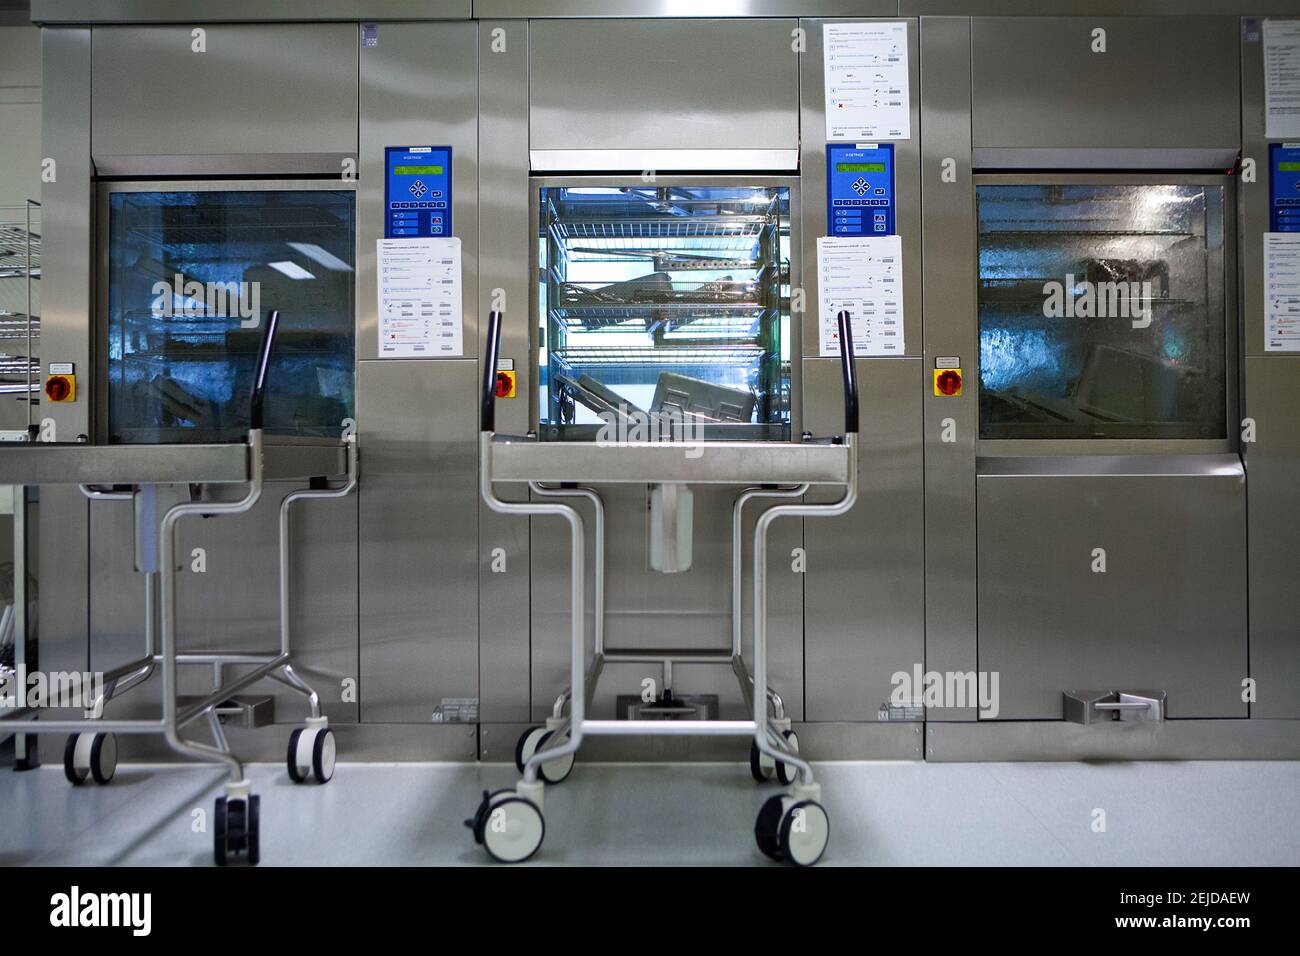 Sterilization unit for all instruments in hospital departments. Stock Photo